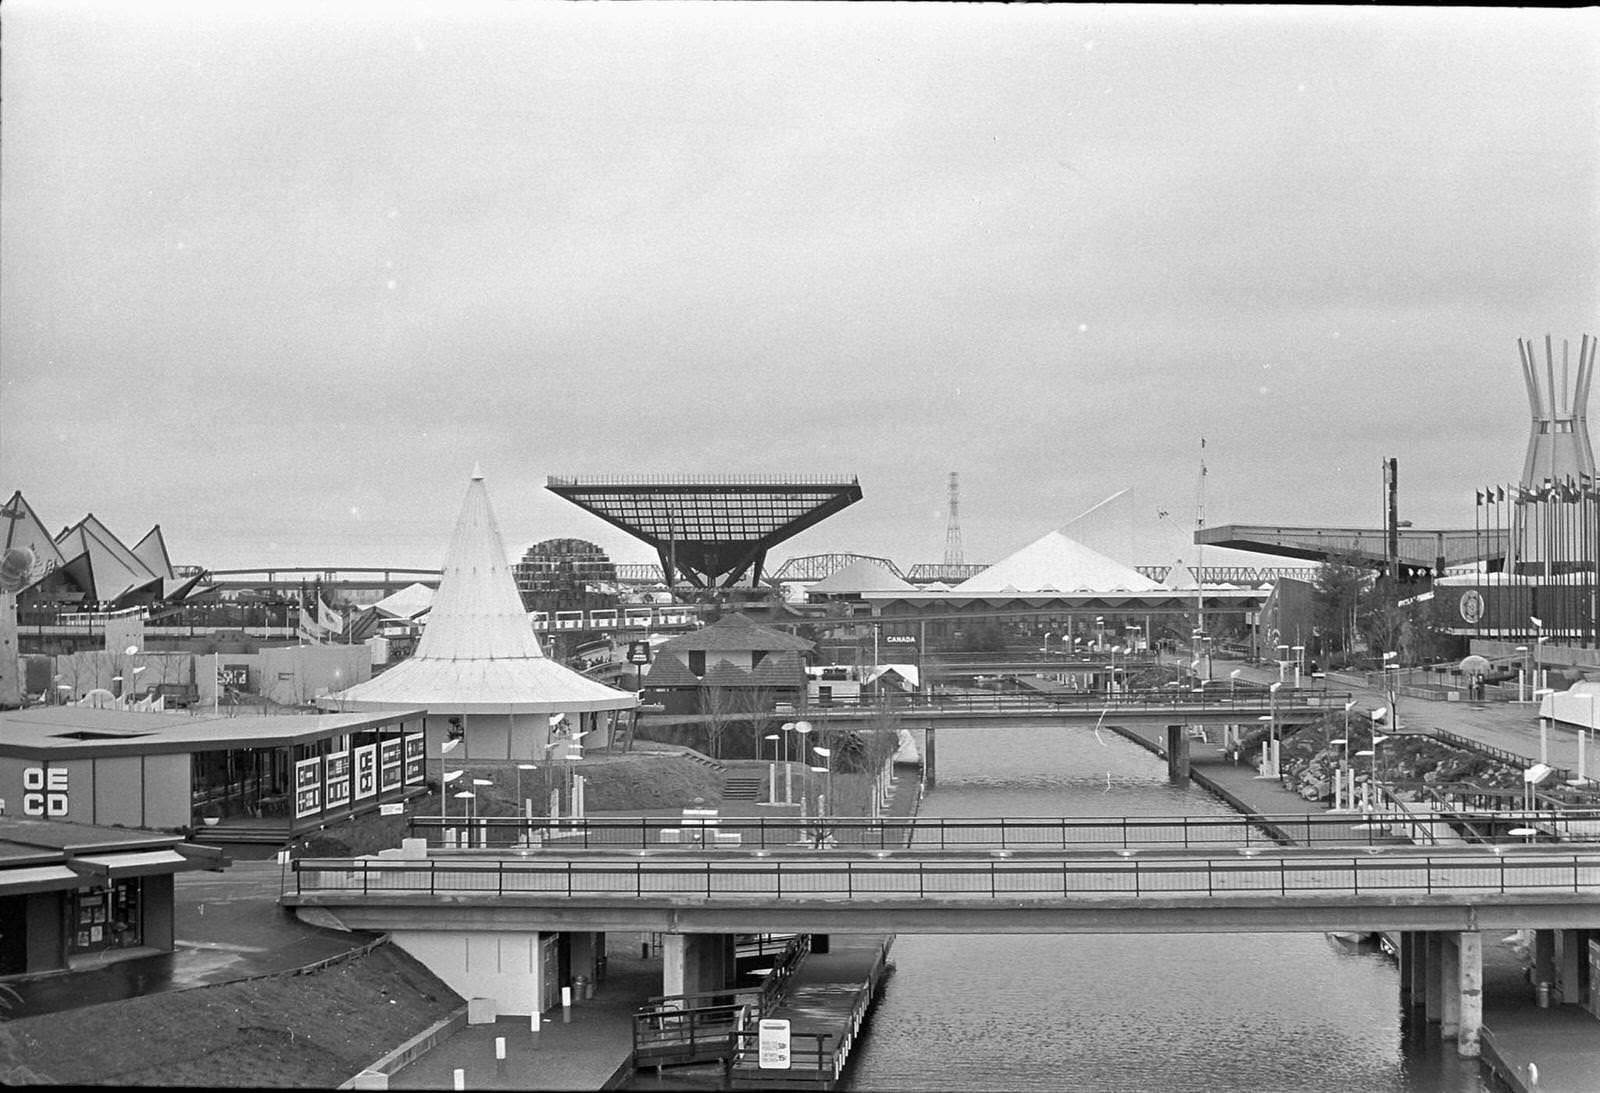 View of the Expo 1967 exhibition grounds